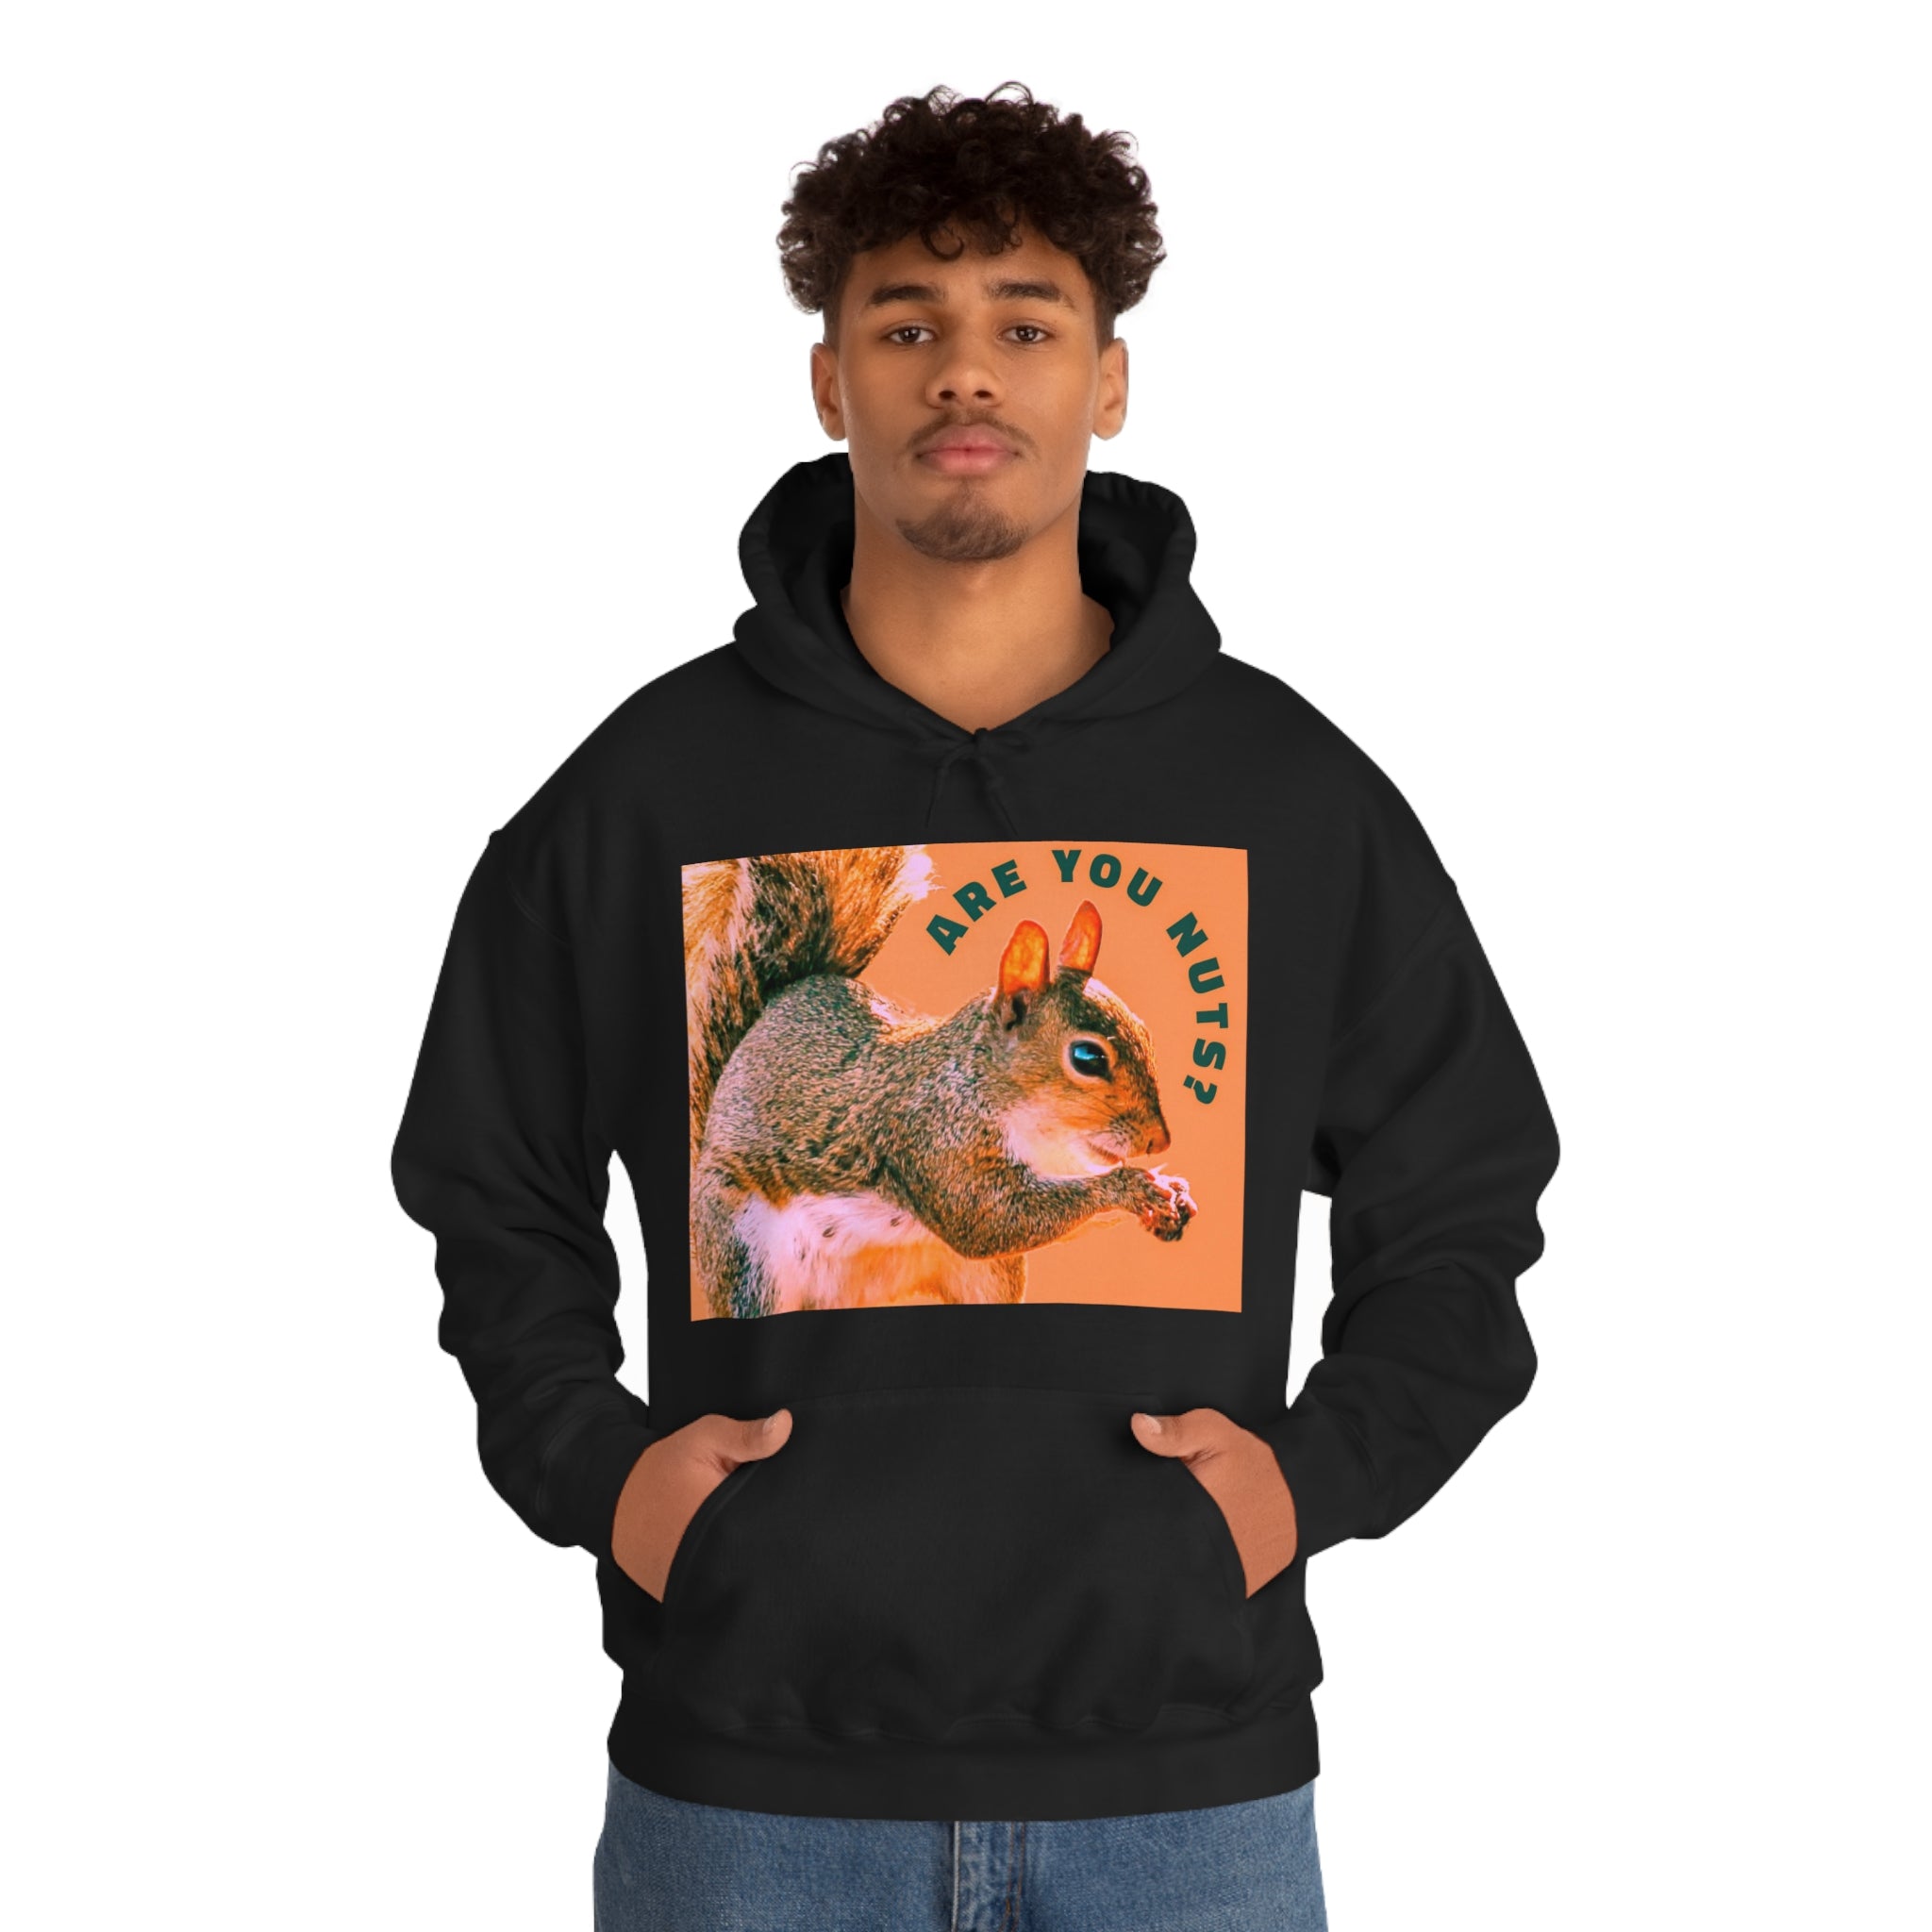 Are you Nuts? Funny Squirrel Unisex Hooded Sweatshirt up to 5XL - Shell Design Boutique